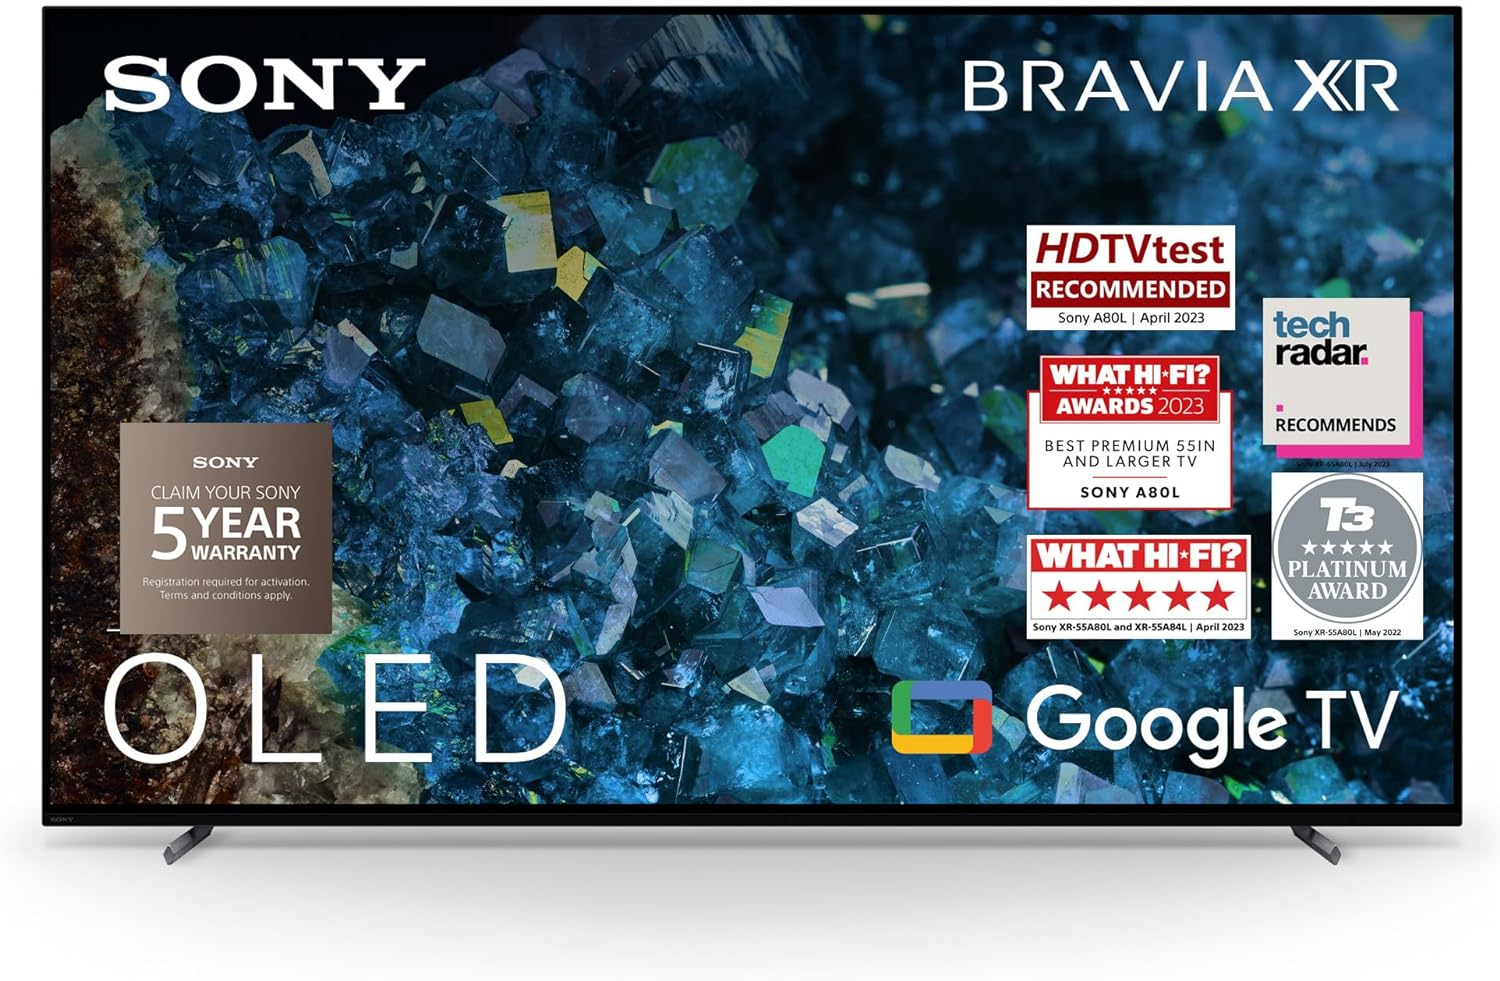 Sony BRAVIA XR, XR - 55A80L, 55 Inch, OLED, Smart TV, 4K HDR, Google TV, ECO PACK, BRAVIA CORE, Perfect for PlayStation5, Metal Flush Surface Design, 5 Year Warranty - Amazing Gadgets Outlet